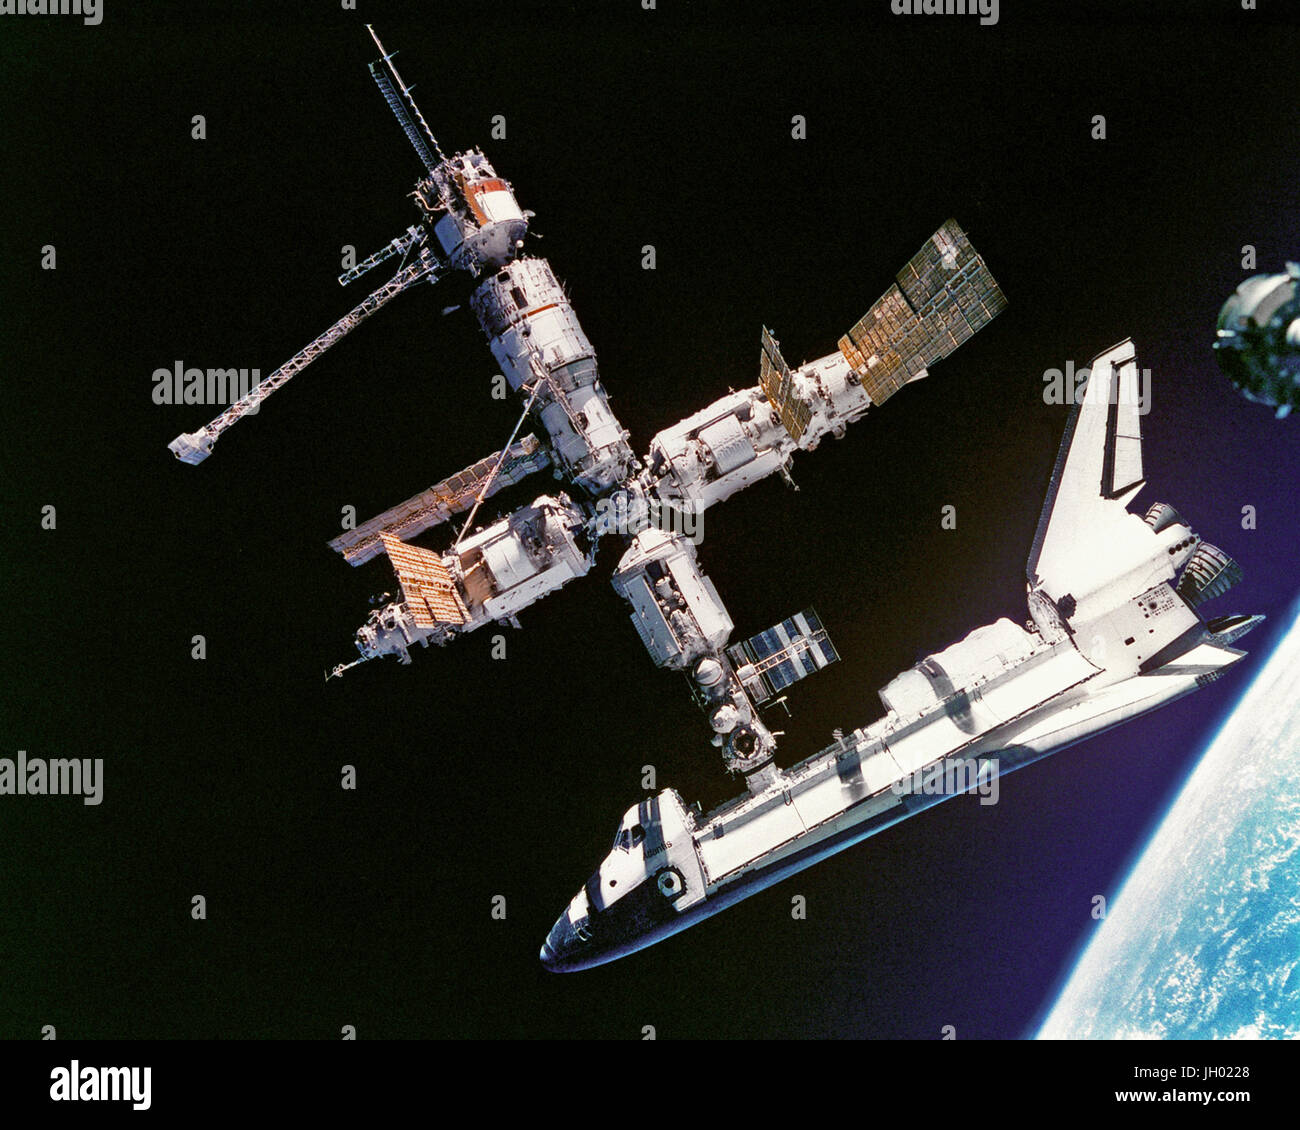 This view of the Space Shuttle Atlantis still connected to Russia's Mir Space Station was photographed by the Mir-19 crew on July 4, 1995. Cosmonauts Anatoliy Y. Solovyev and Nikolai M. Budarin, Mir-19 Commander and Flight Engineer, respectively, temporarily undocked the Soyuz spacecraft from the cluster of Mir elements to perform a brief fly-around. They took pictures while the STS-71 crew, with Mir-18's three crew members aboard, undocked Atlantis for the completion of this leg of the joint activities. Stock Photo